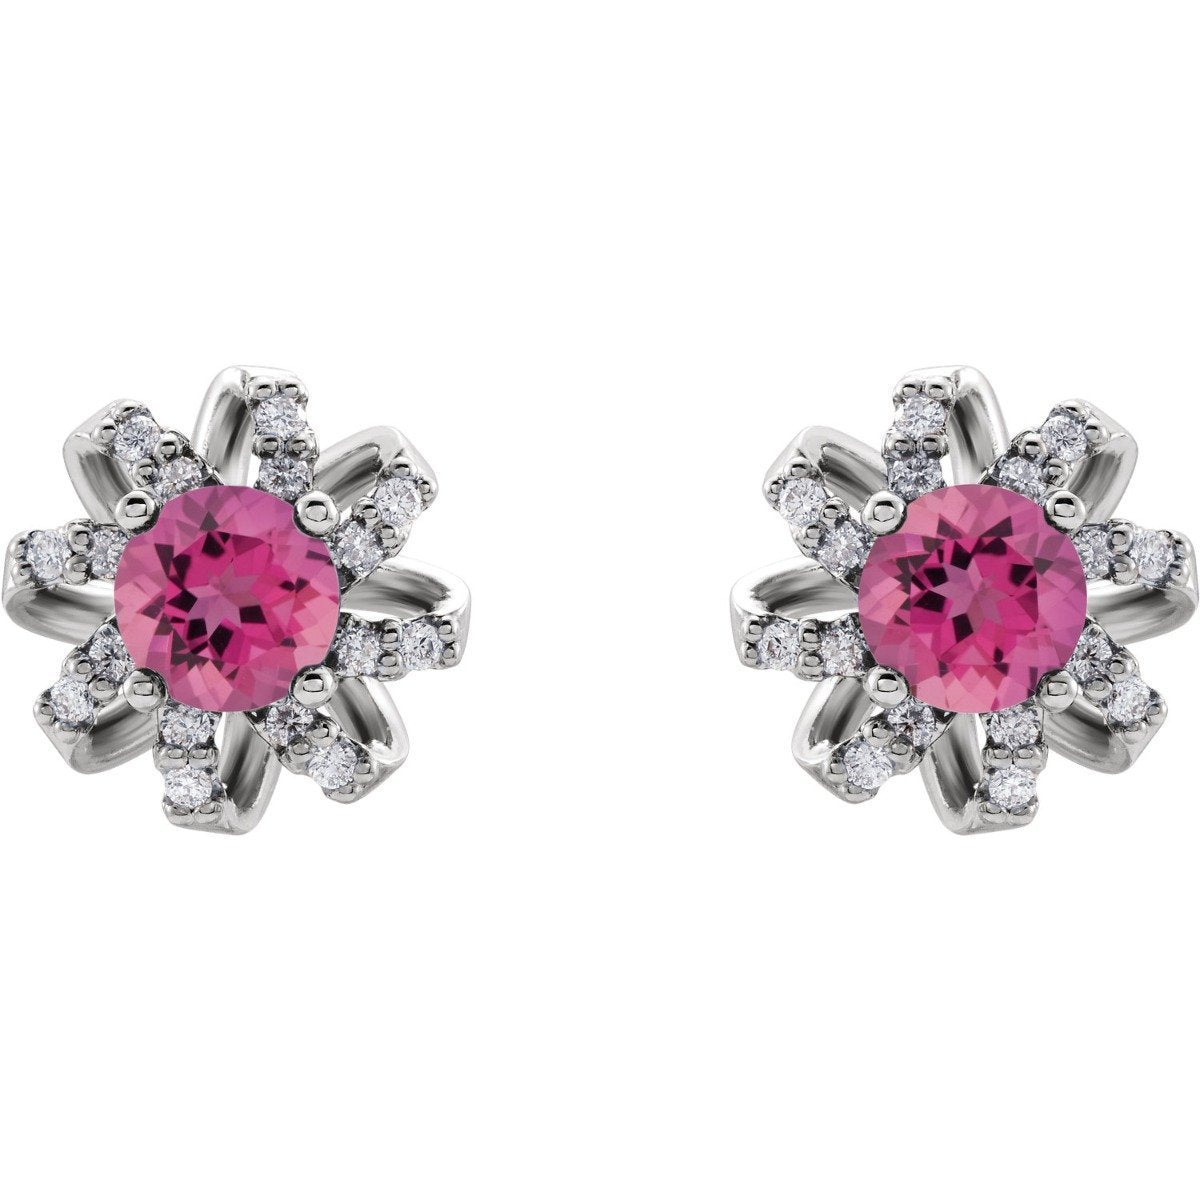 14KT GOLD 1.10 CTW PINK TOURMALINE & 1/8 CTW DIAMOND FLORAL HALO EARRINGS Rose,White,Yellow